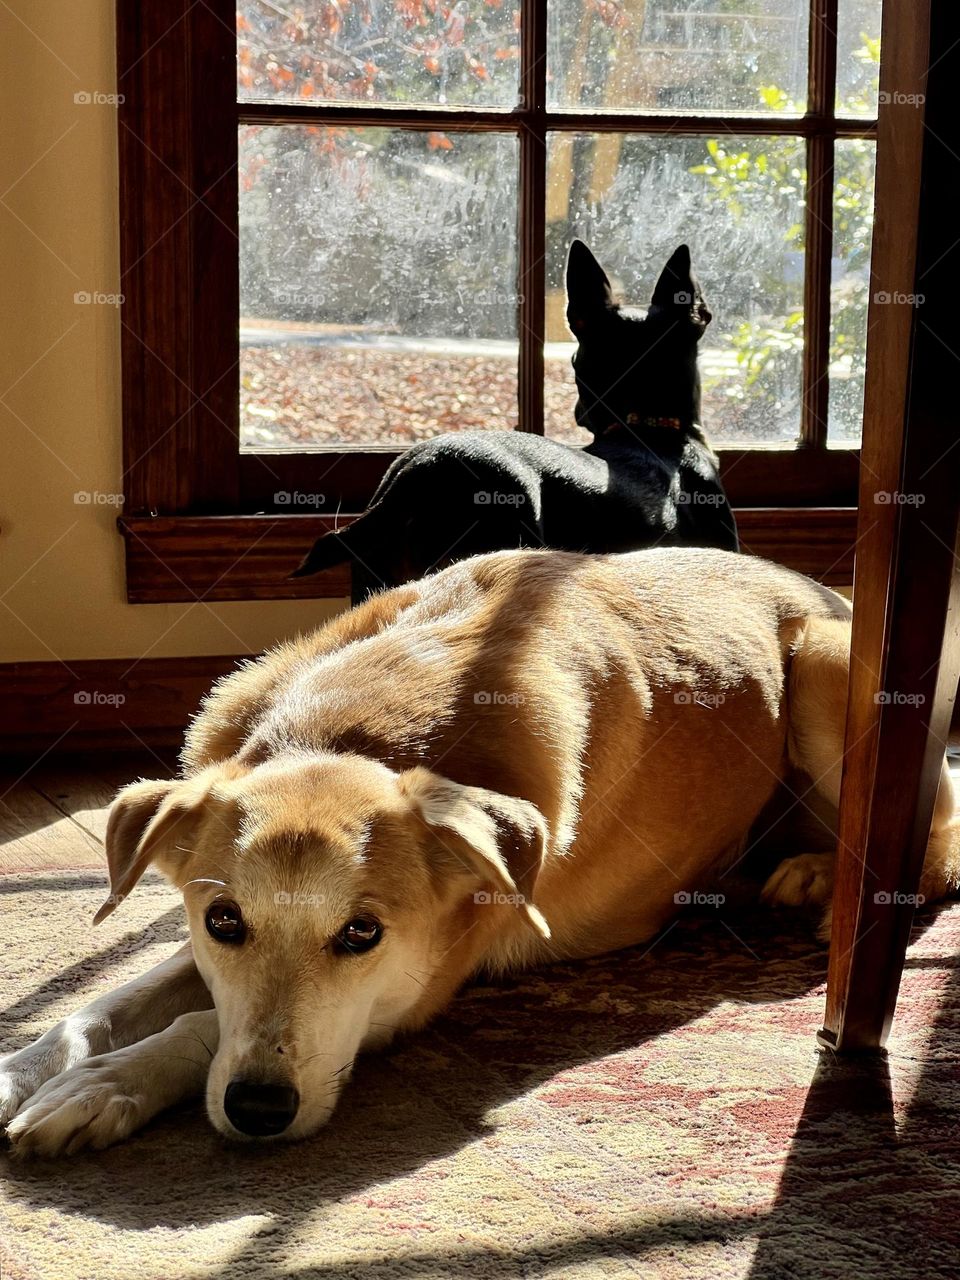 Two pet dogs enjoying the warmth of a sunny window on a cold day